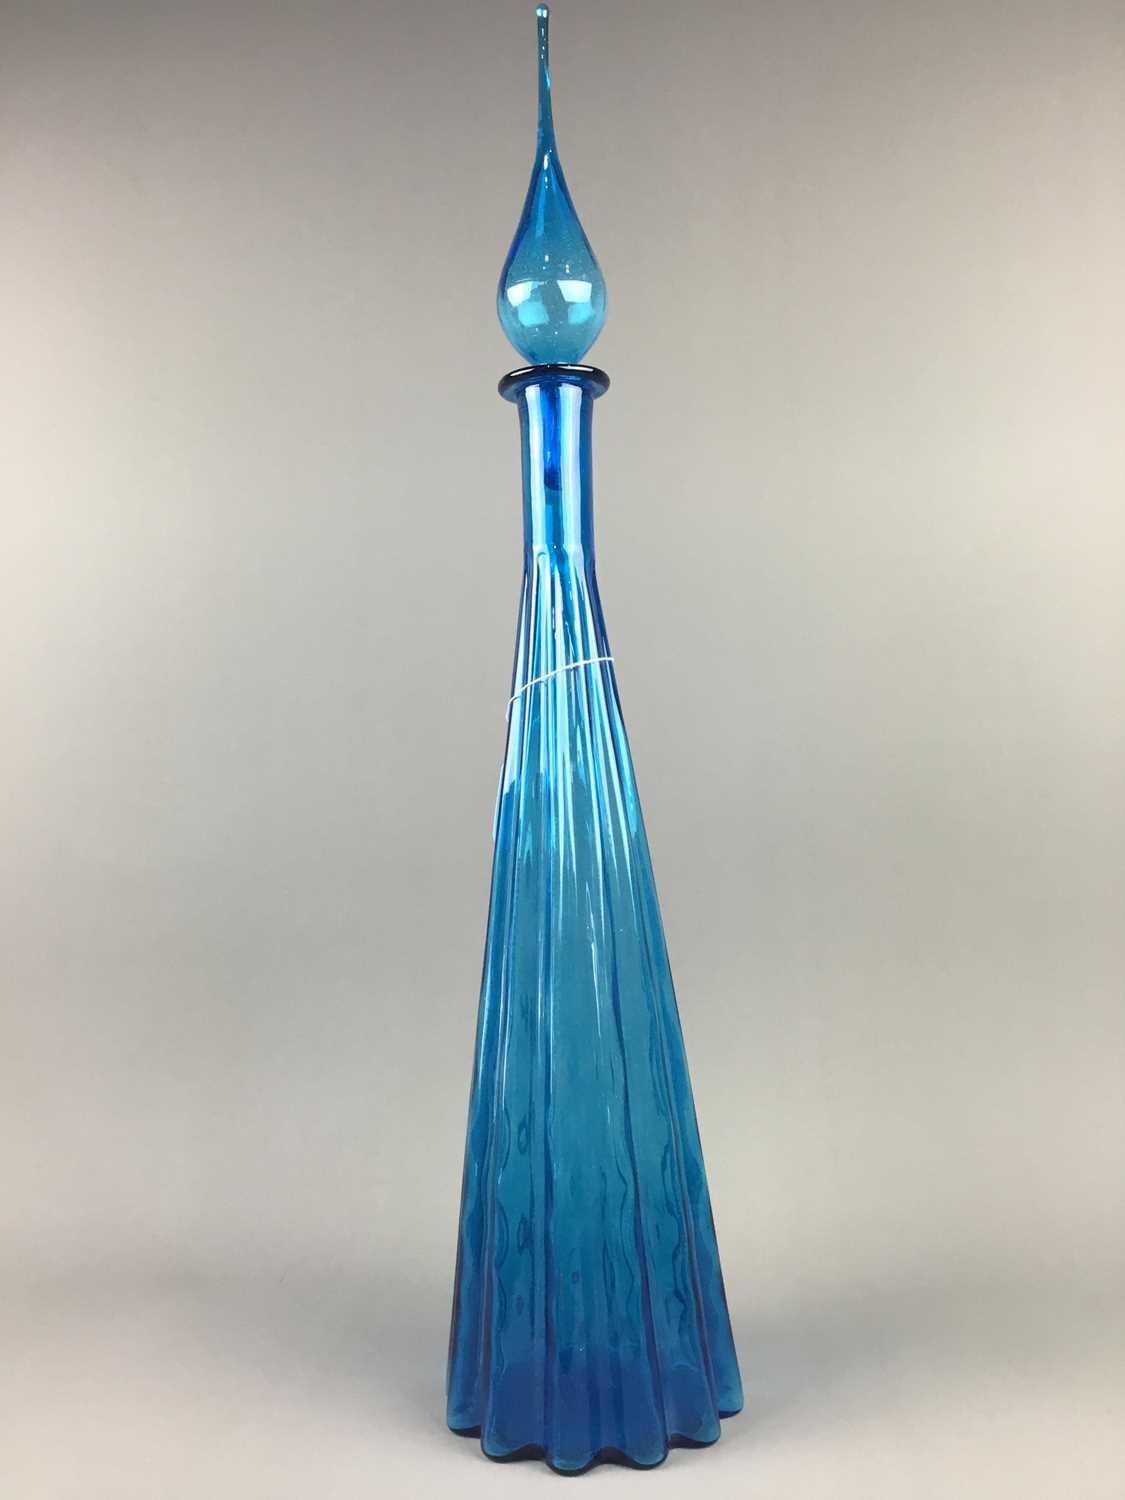 Lot 76 - A TALL BLUE GLASS DECANTER WITH STOPPER AND OTHER GLASS WARE